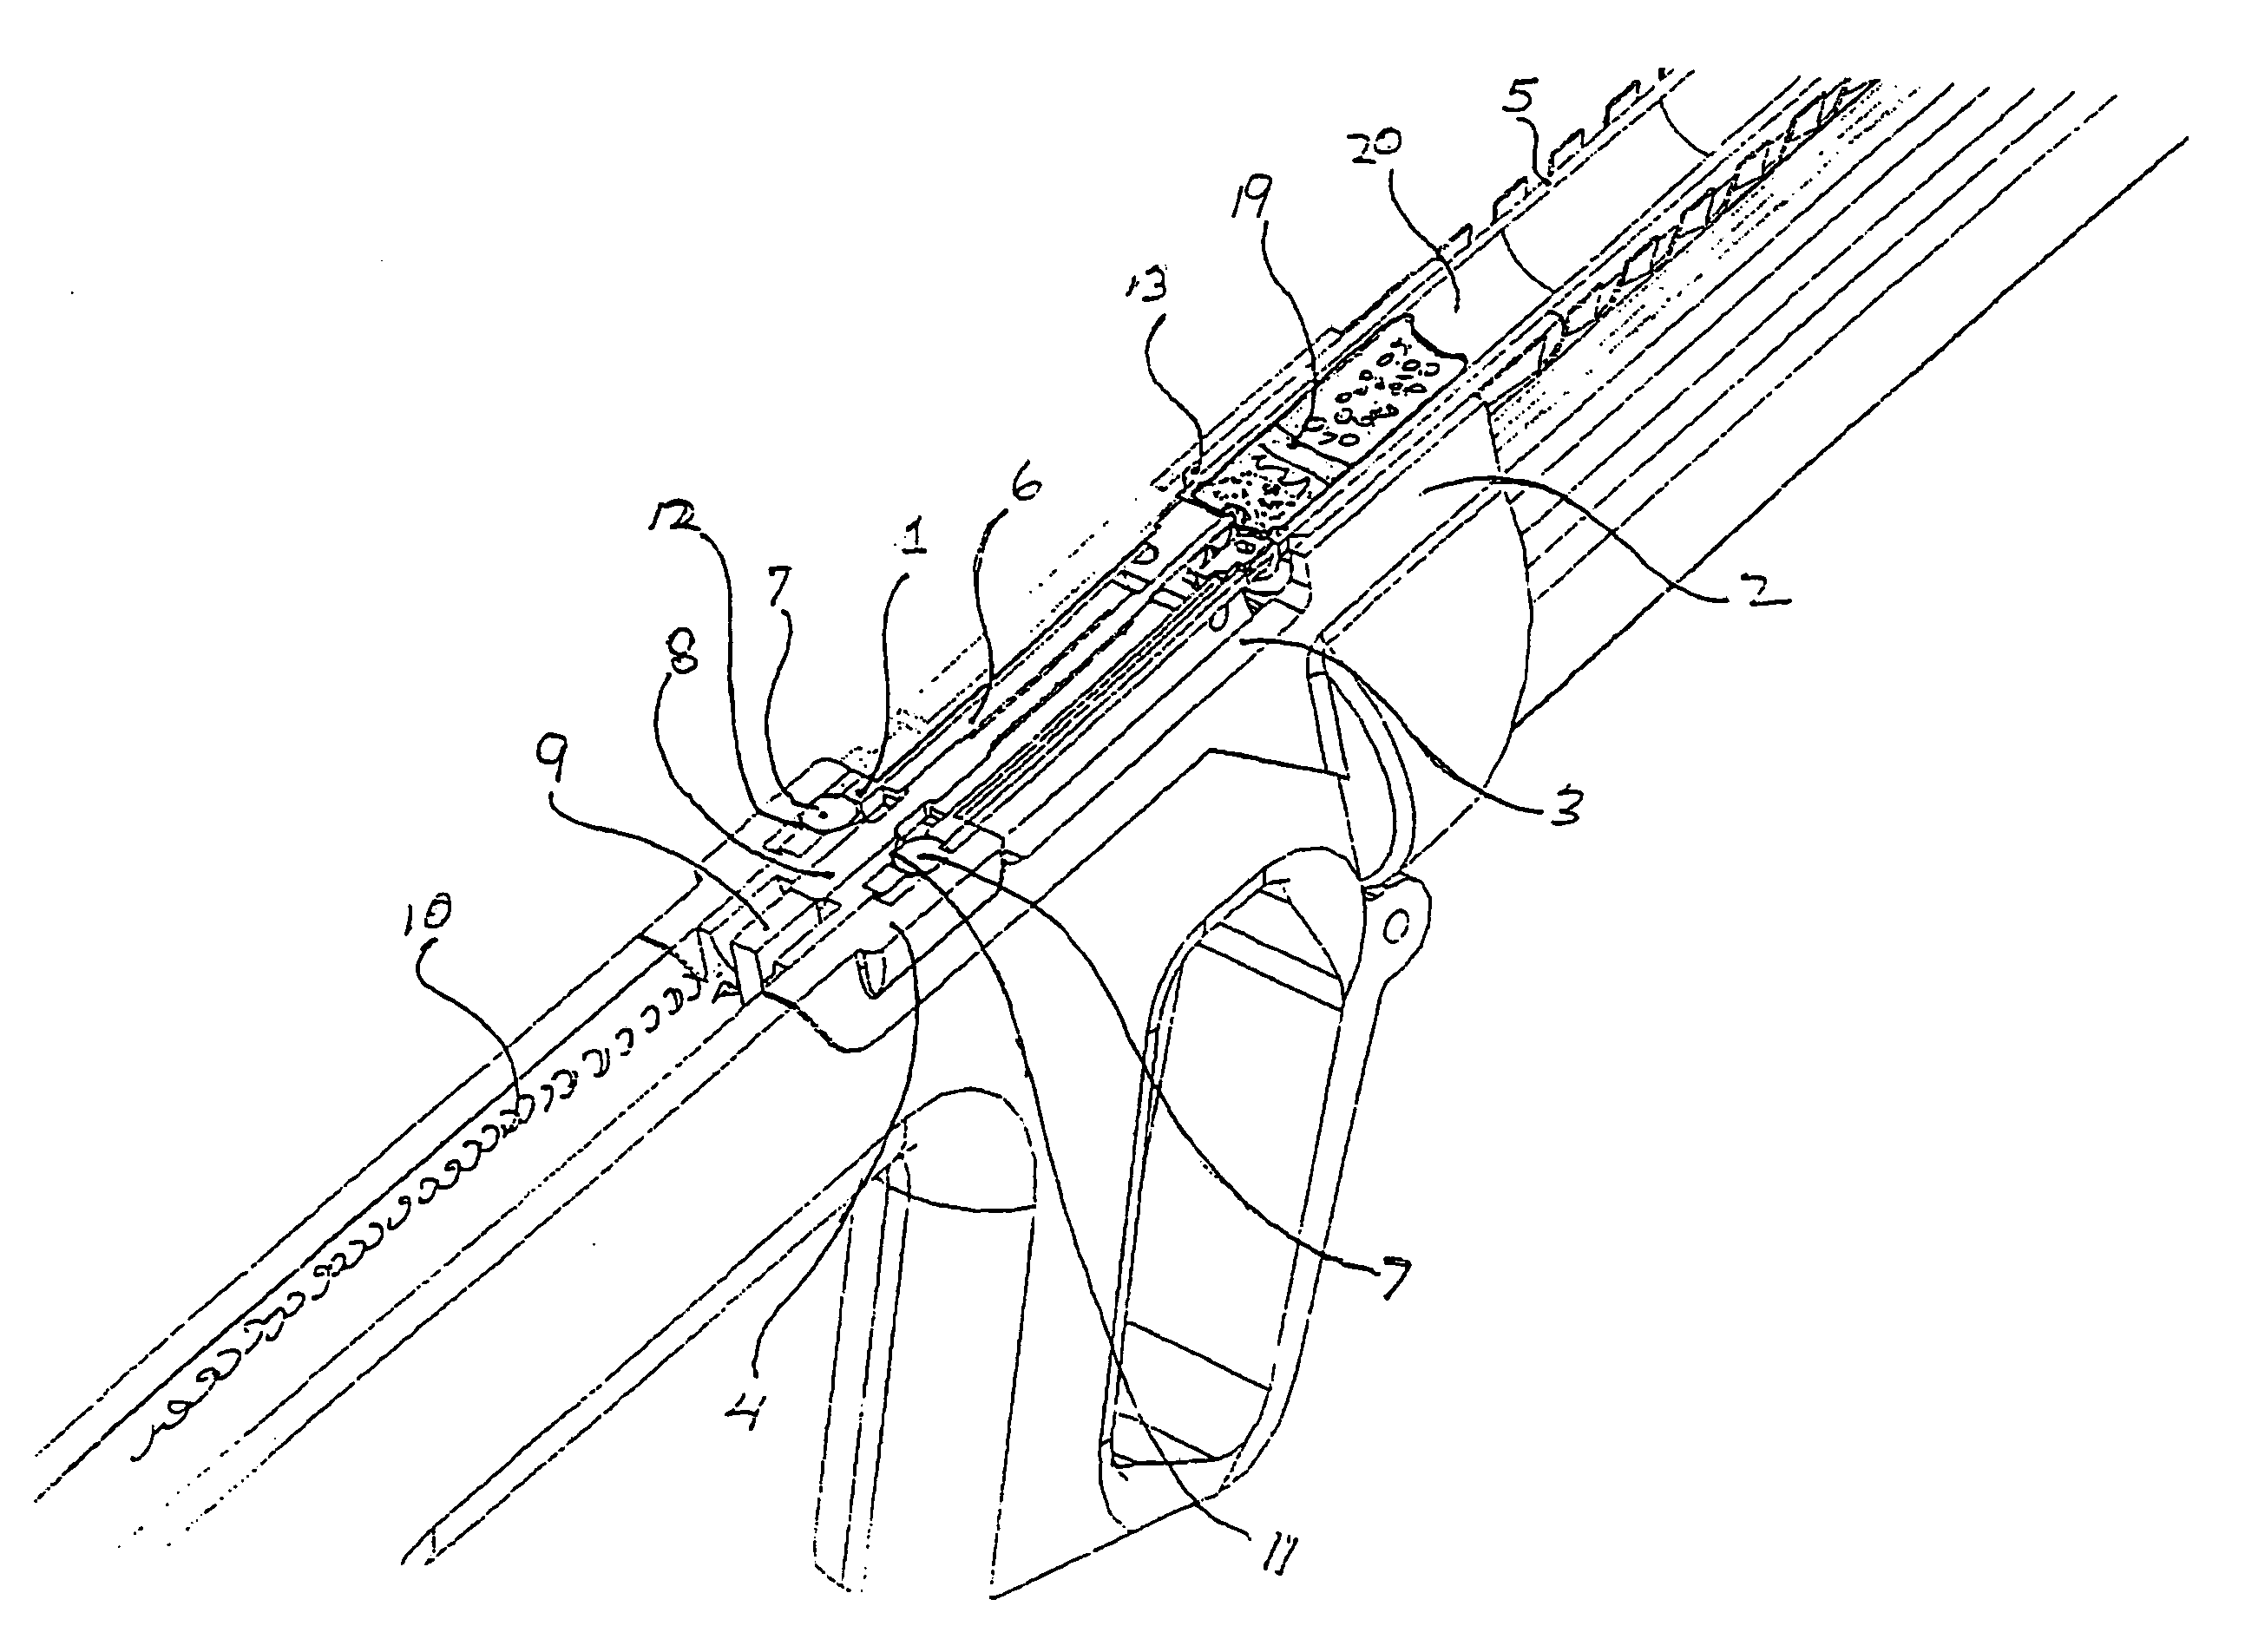 Method and apparatus for an action system for a firearm